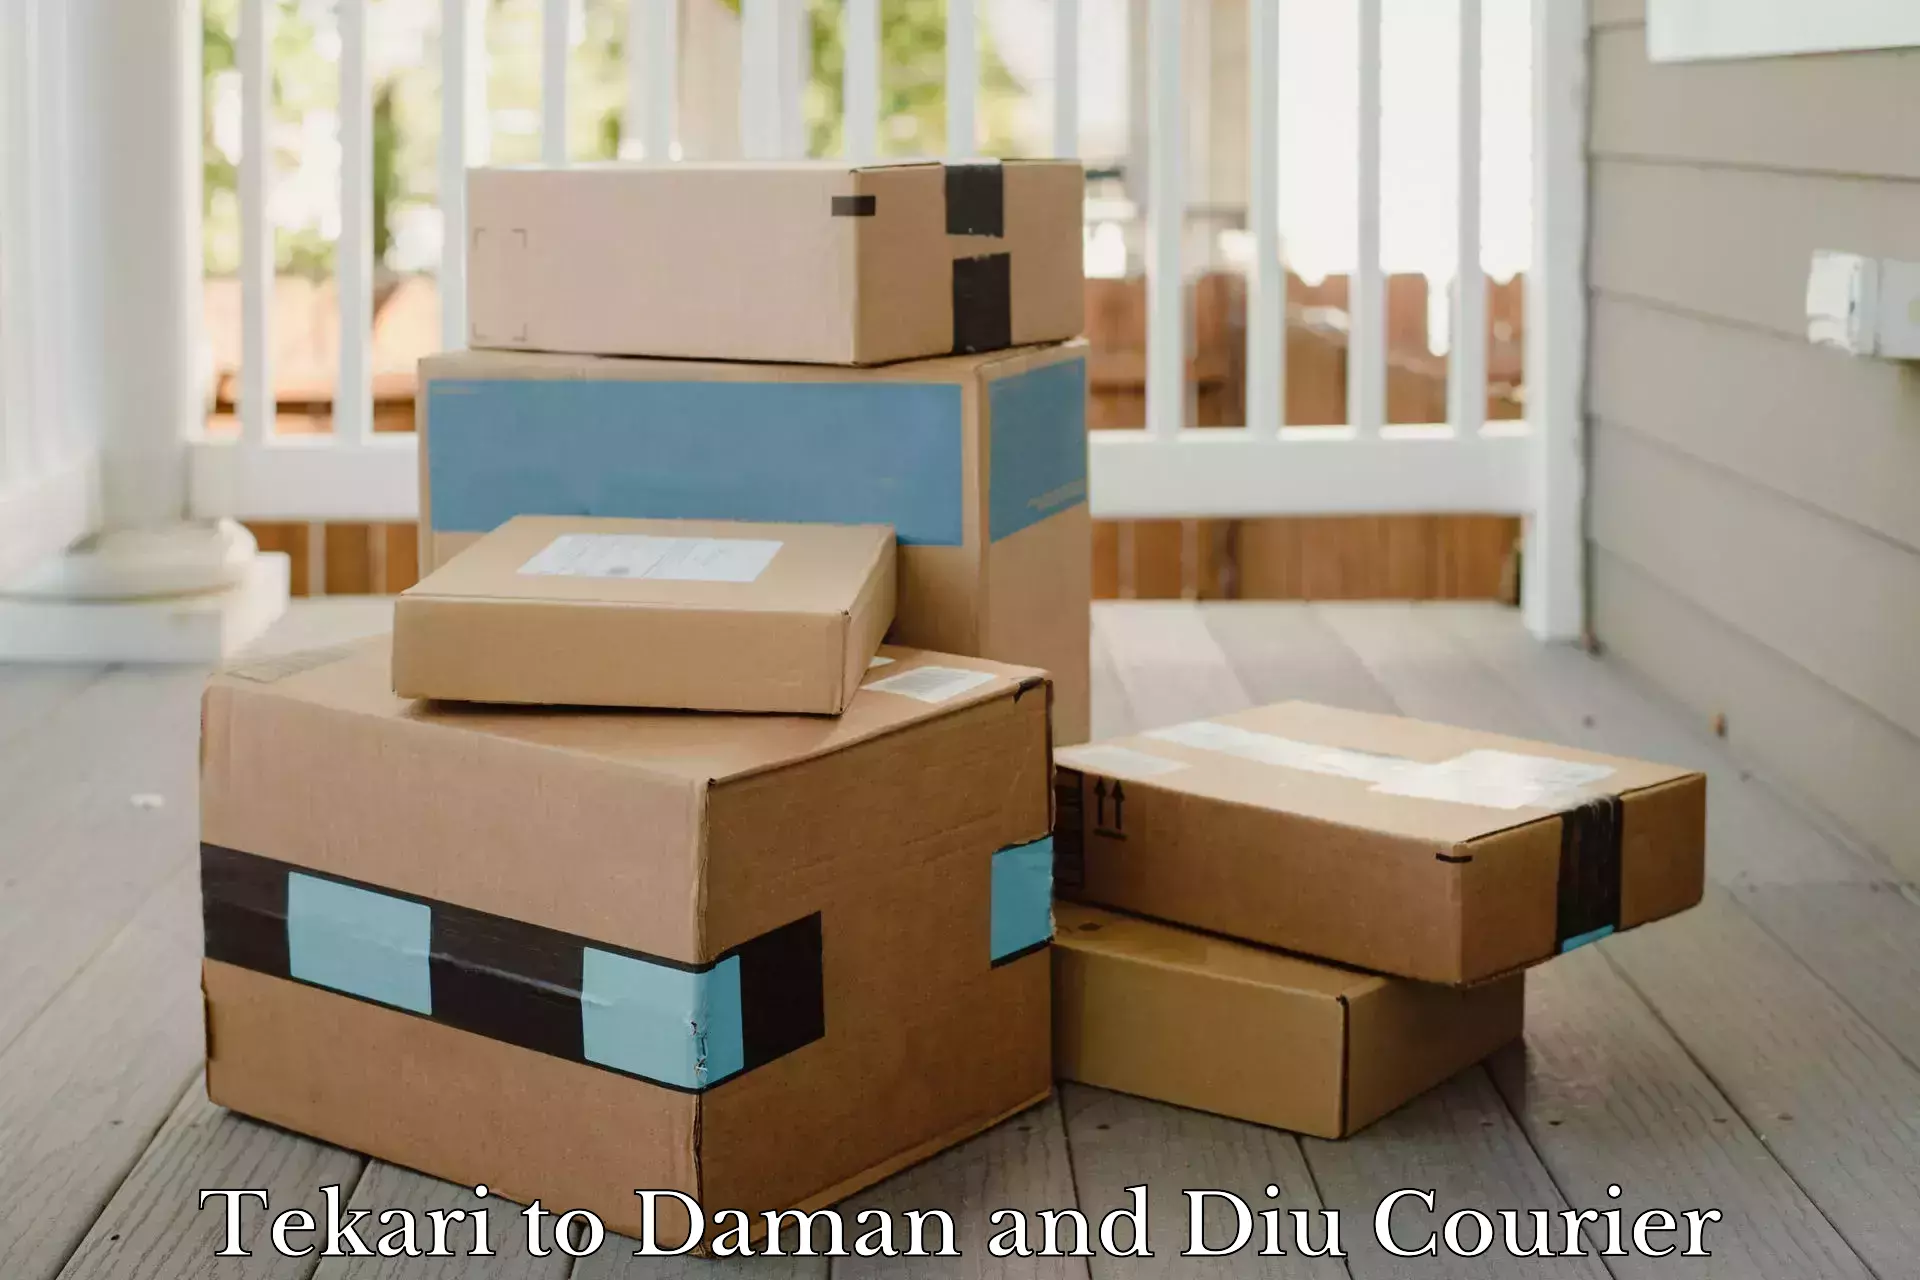 Package delivery network Tekari to Daman